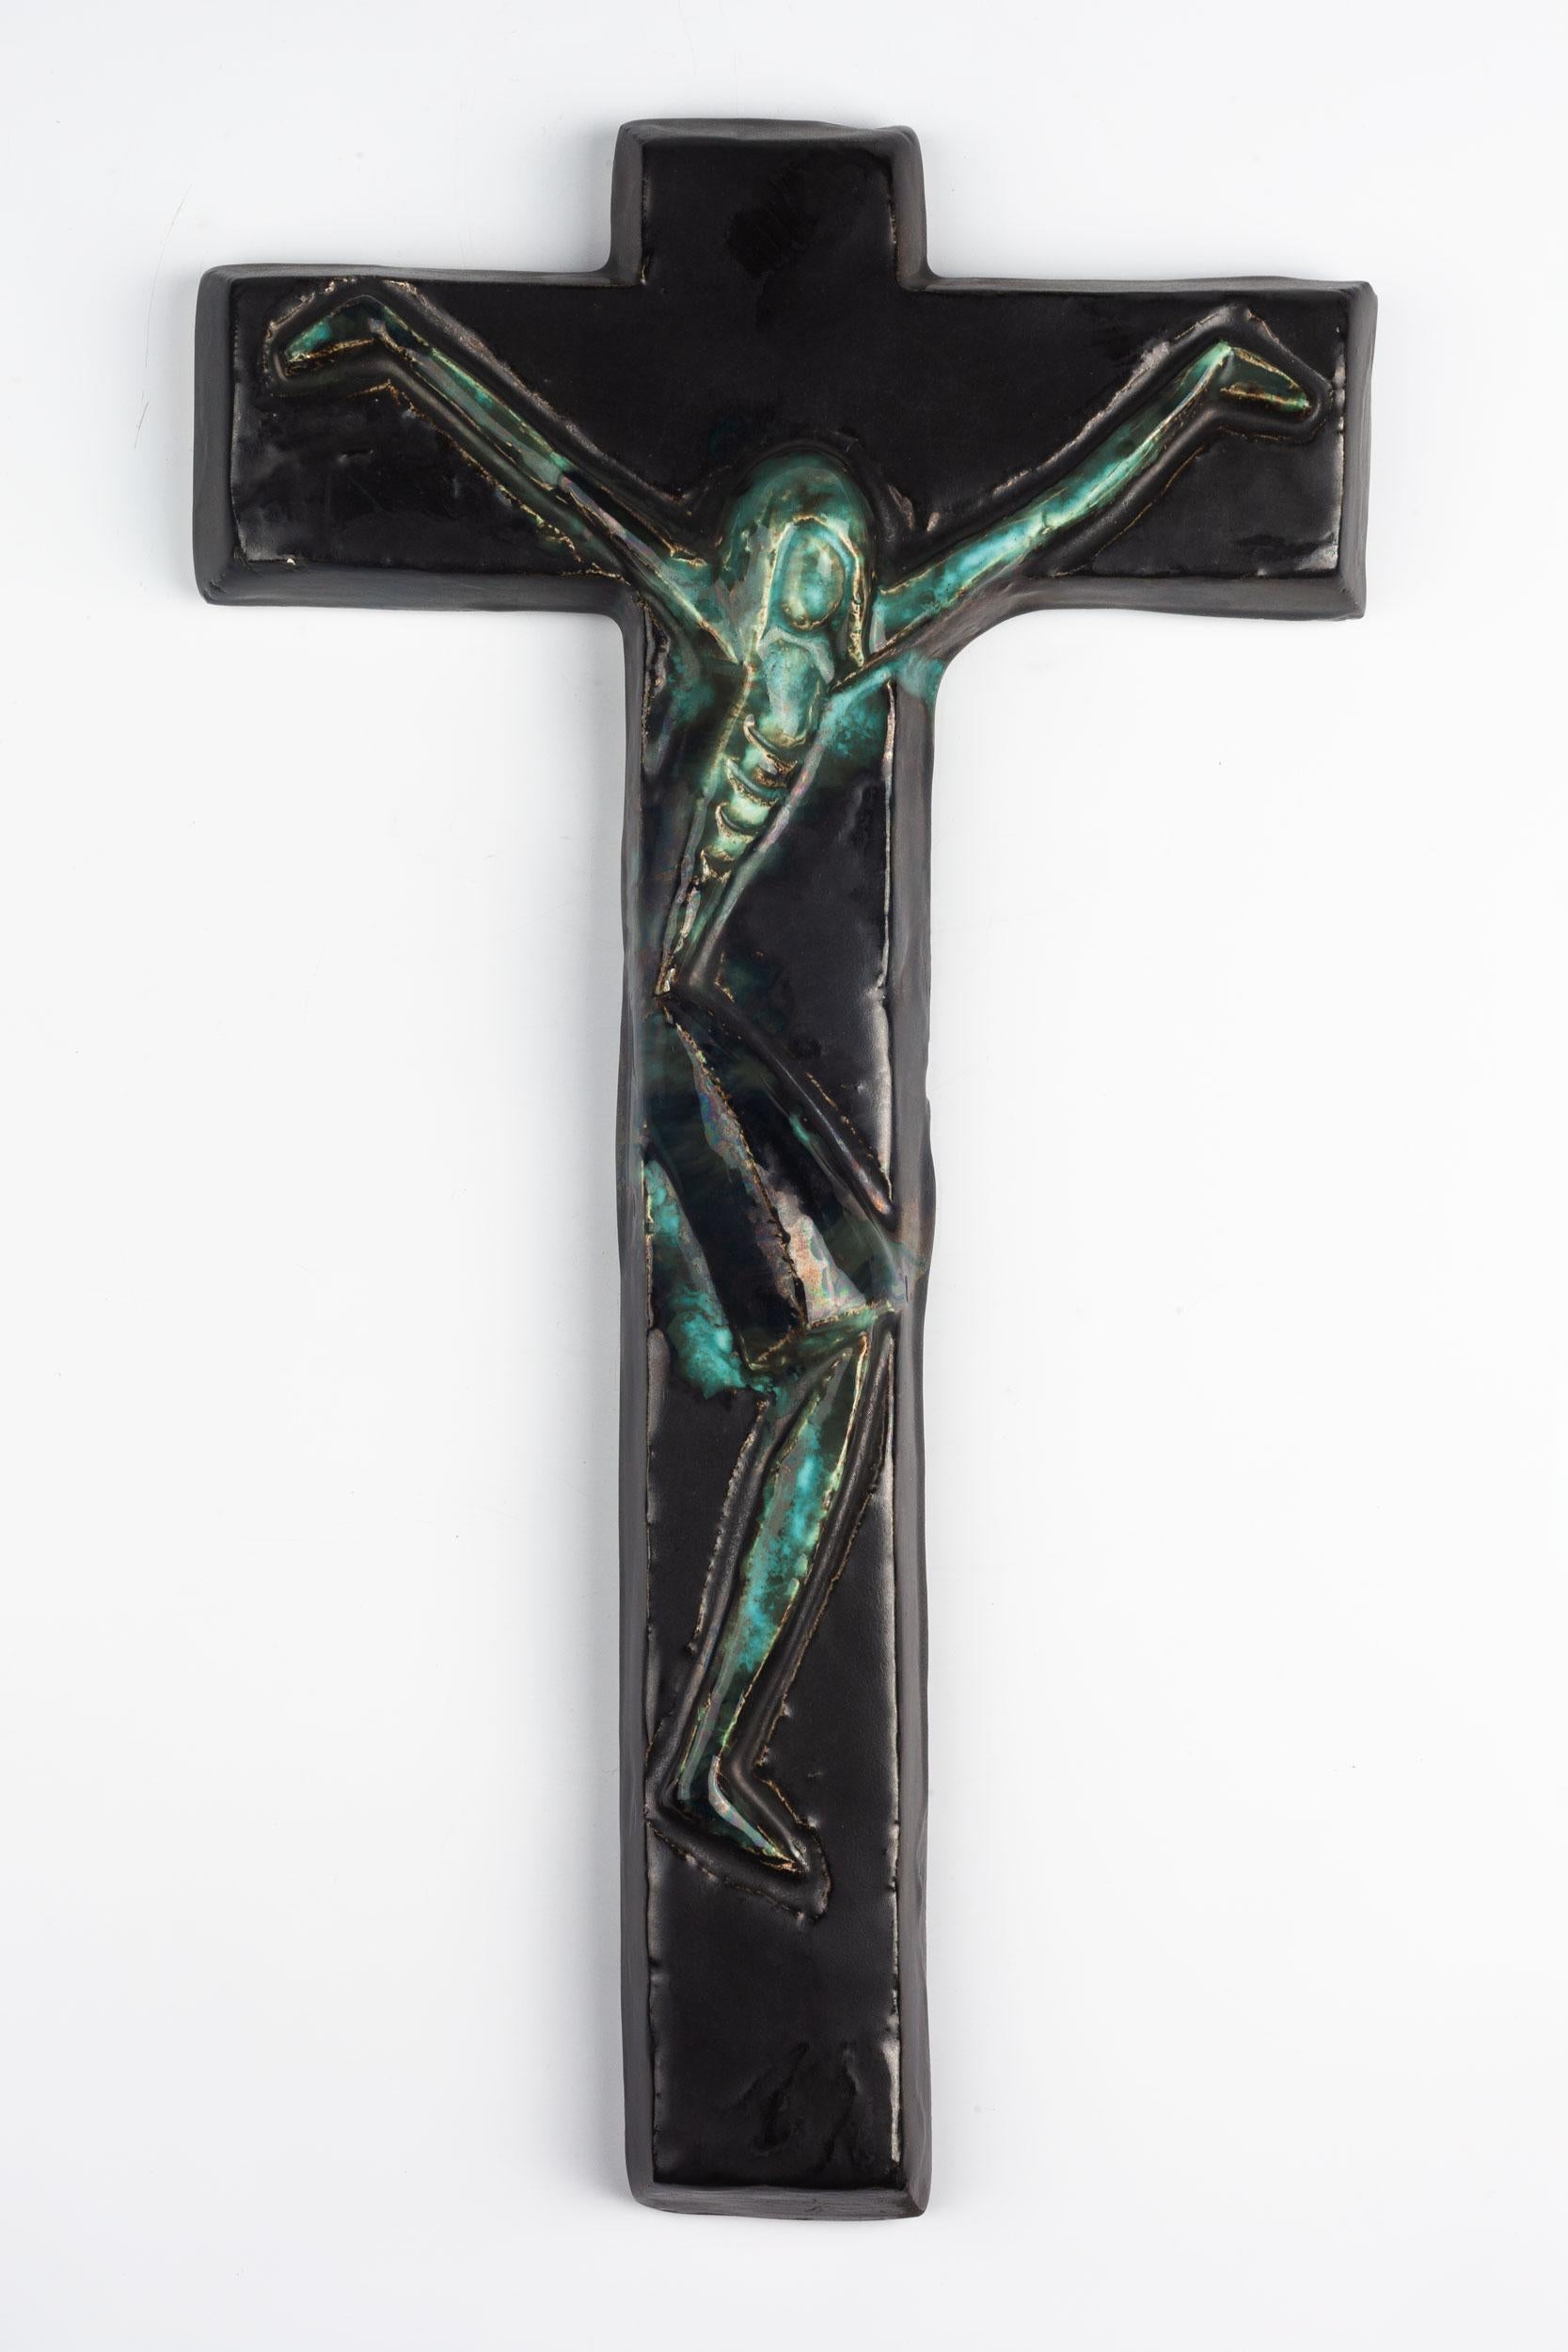 Large sixteen-inch tall ceramic crucifix, handmade in Europe in the 1960s. Colorfully painted in deep and light blue and green tones with an abstracted, angular Christ figure. A one-of-a-kind, handcrafted piece that is part of a large collection of